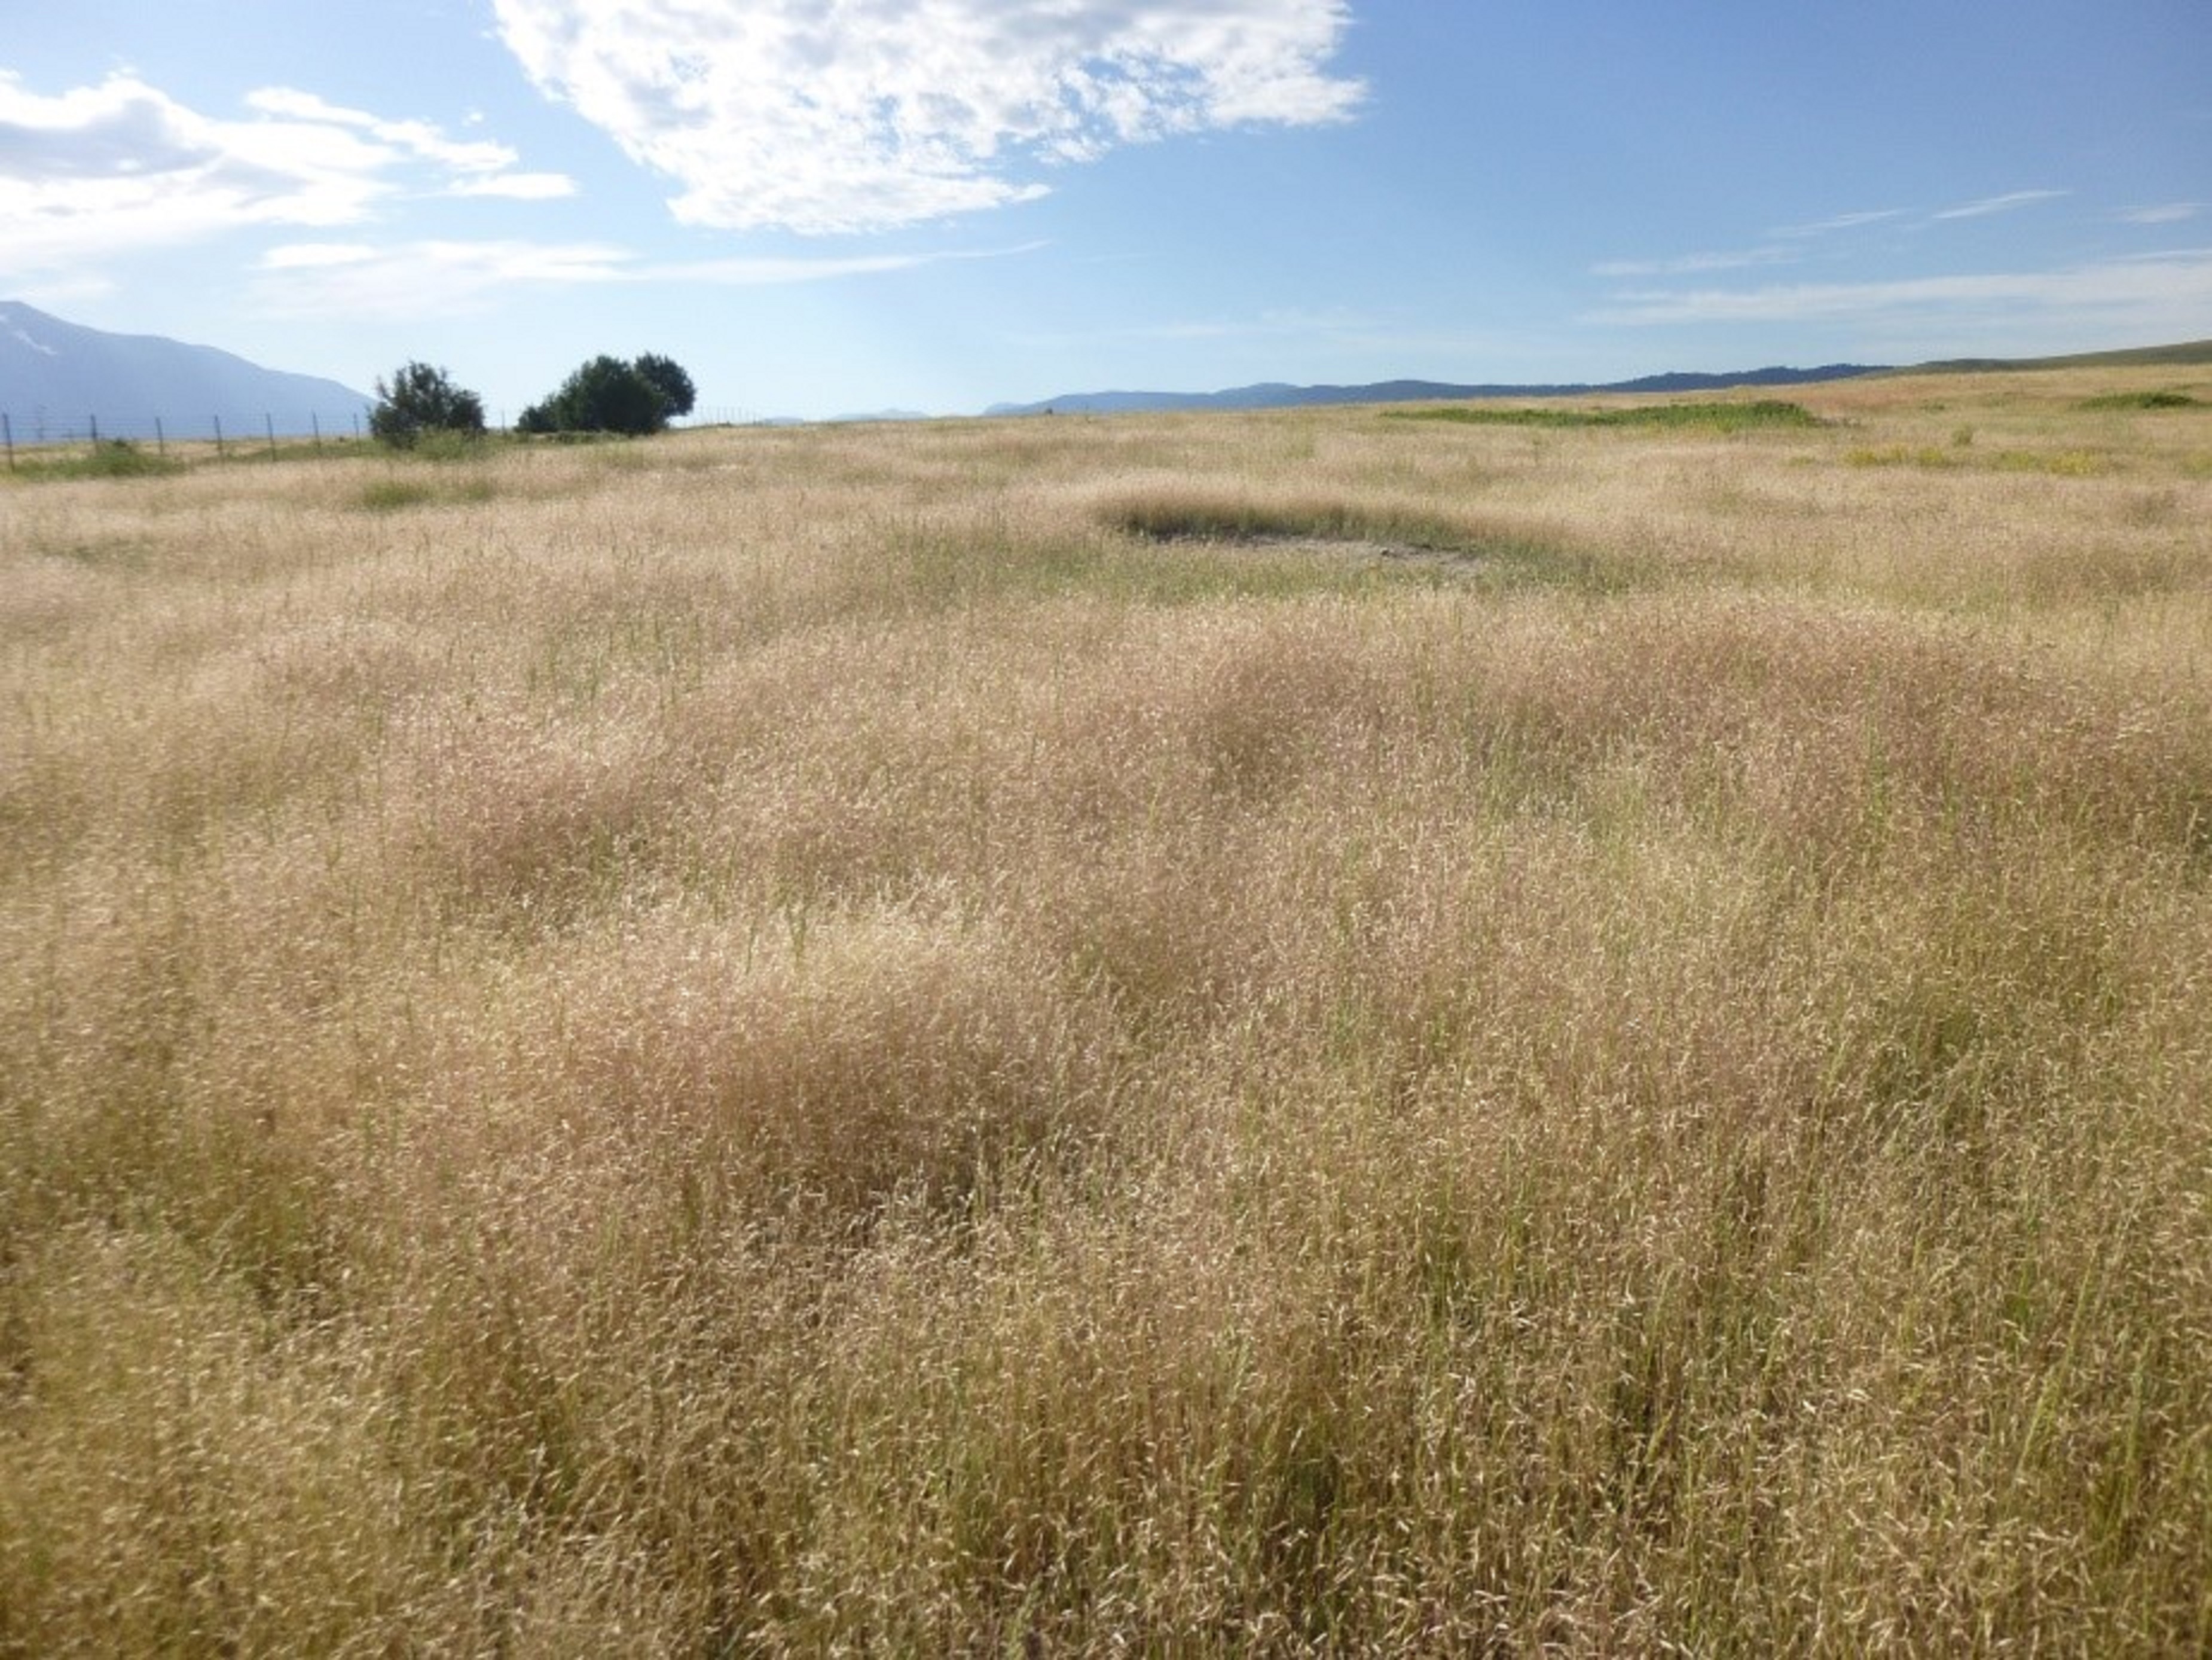 Ventenata, an exotic invasive grass, was one of the most common submissions to the Schutter Diagnostic Lab in 2018 (photo credit Stacy Davis).